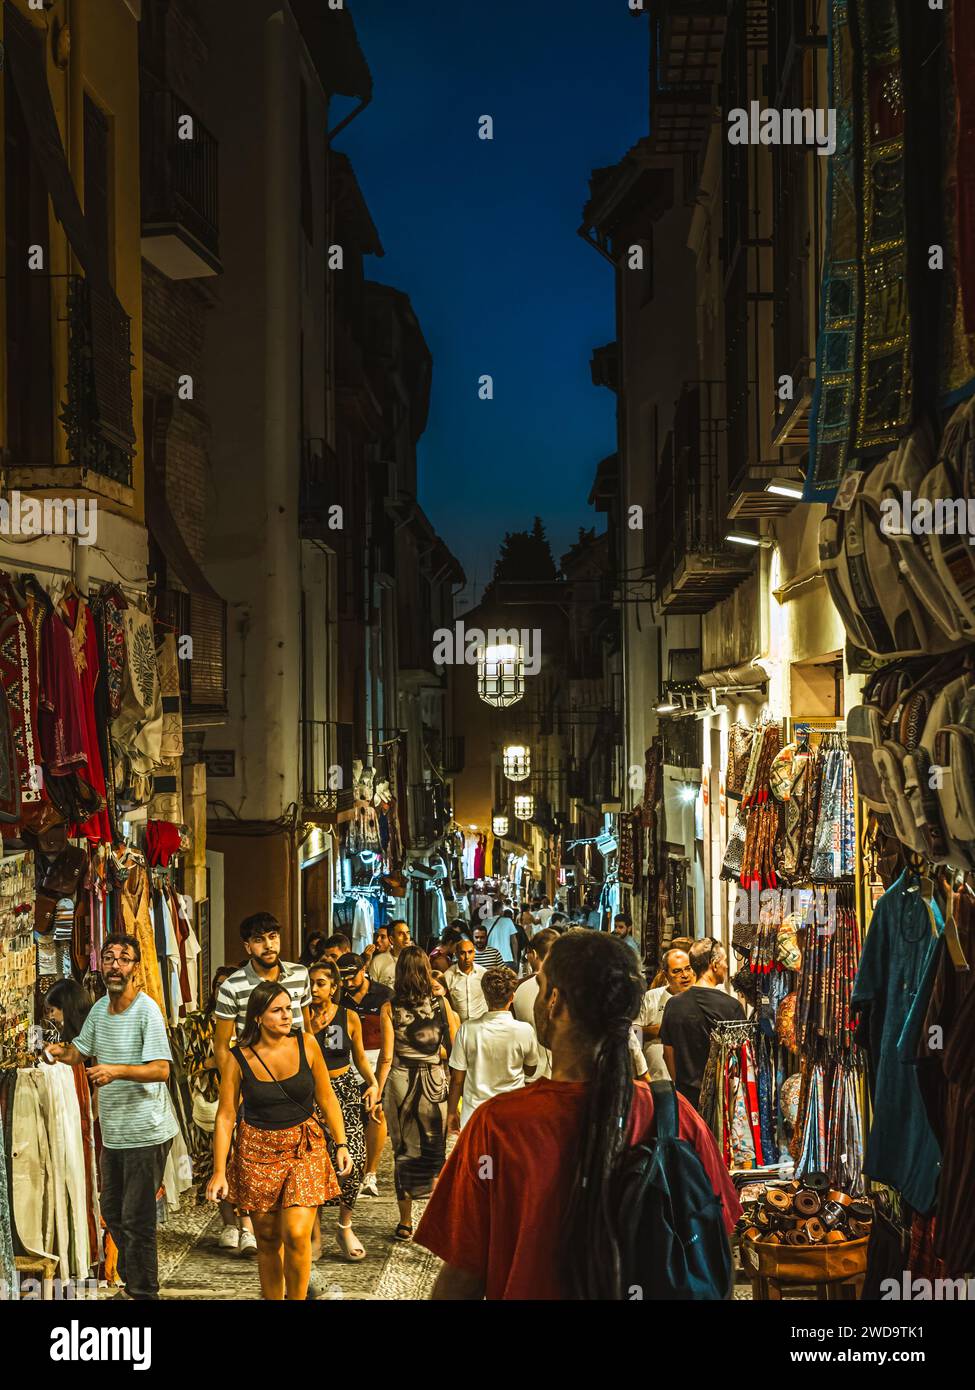 Granada, Andalucia, Spain - September 9, 2023: typical restaurants and shops in the Calle Caldereria Nueva street of the popular old Moorish quarter A Stock Photo